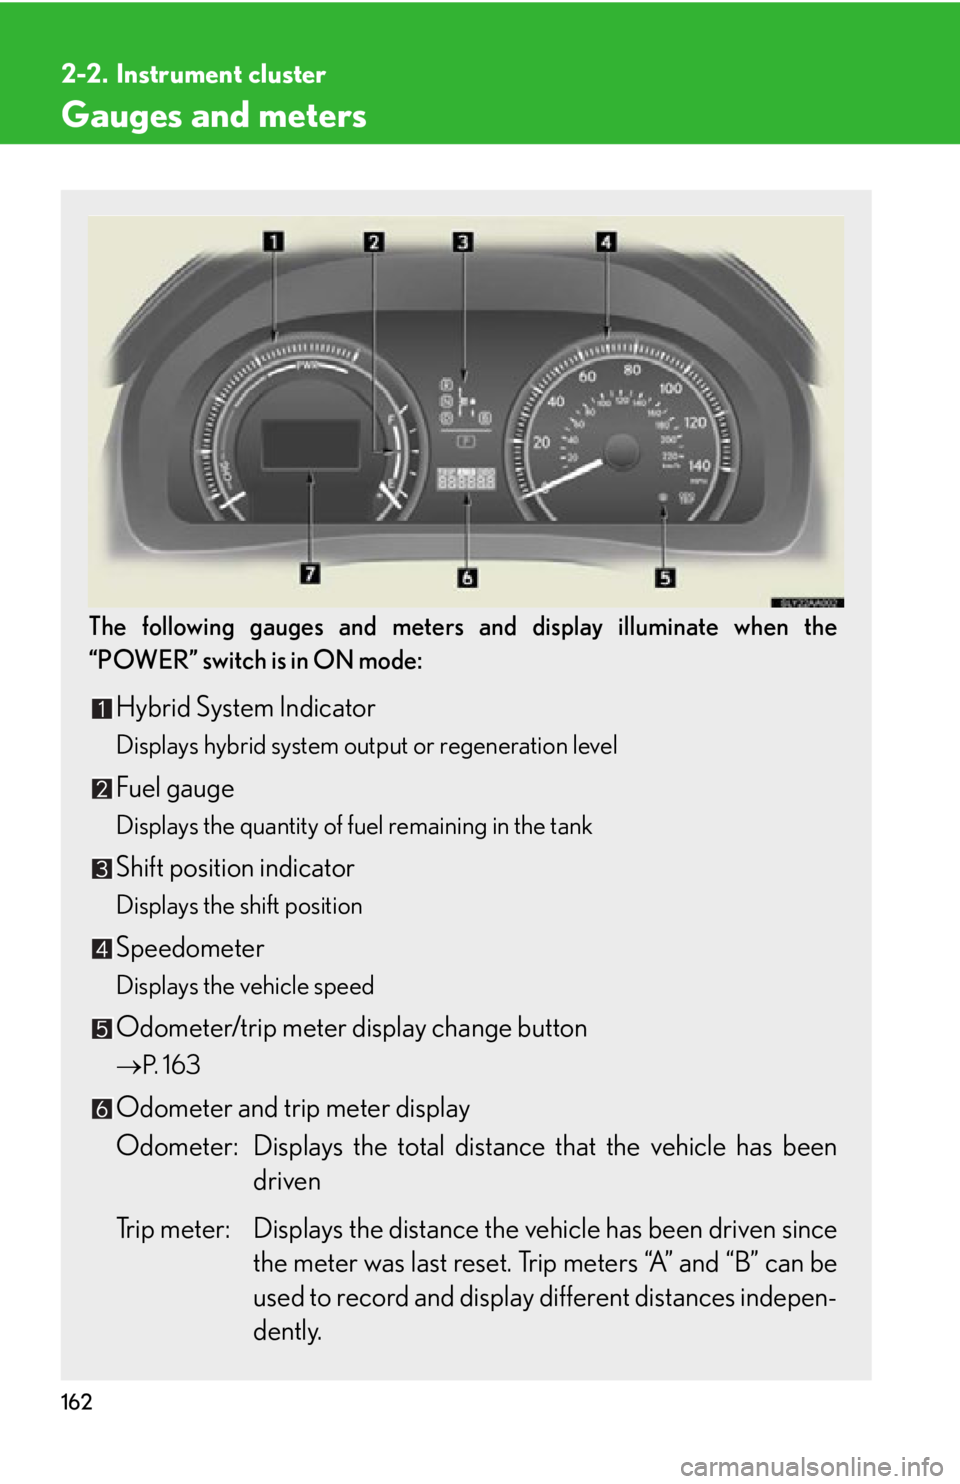 Lexus HS250h 2010  Using the Bluetooth audio system / LEXUS 2010 HS250H OWNERS MANUAL (OM75006U) 162
2-2. Instrument cluster
Gauges and meters
The following gauges and meters and display illuminate when the 
“POWER” switch is in ON mode:
Hybrid System Indicator
Displays hybrid system output o